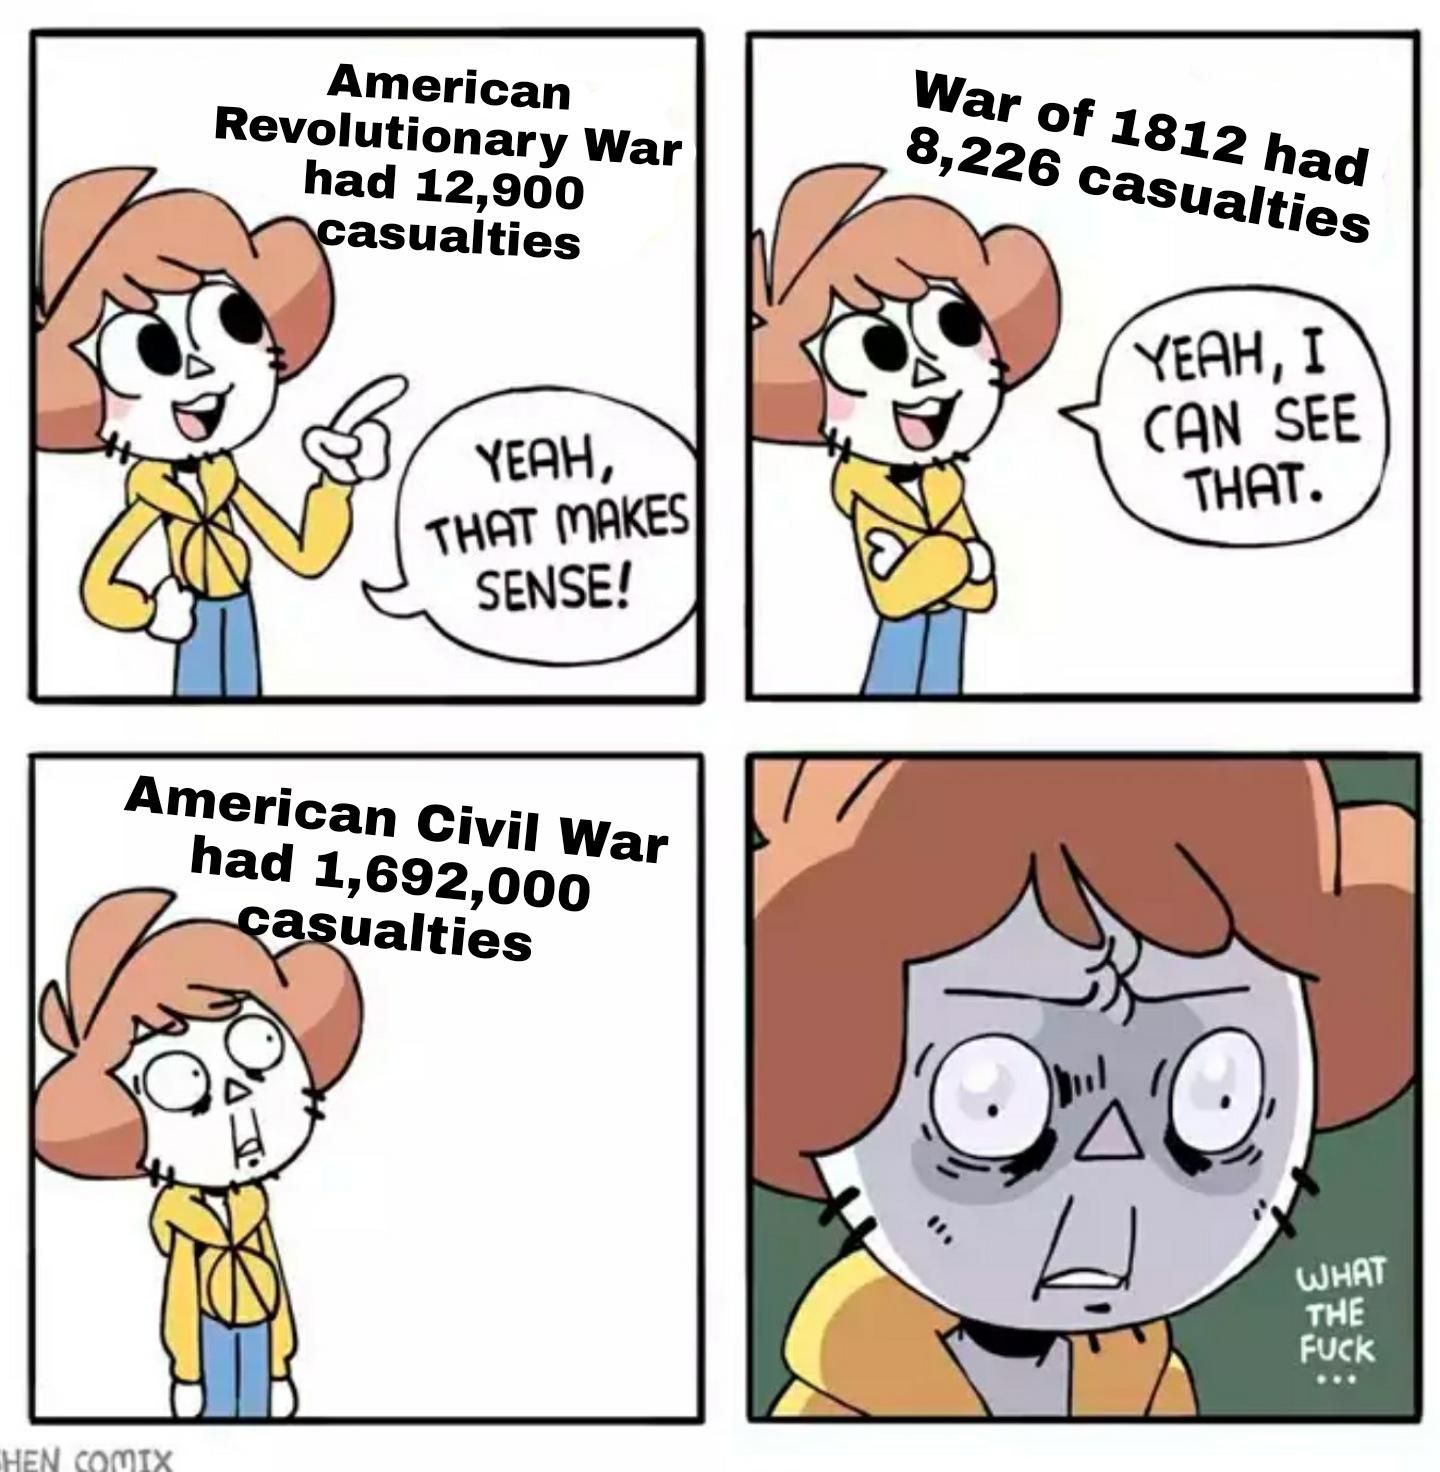 The Civil War was on a whole nother level